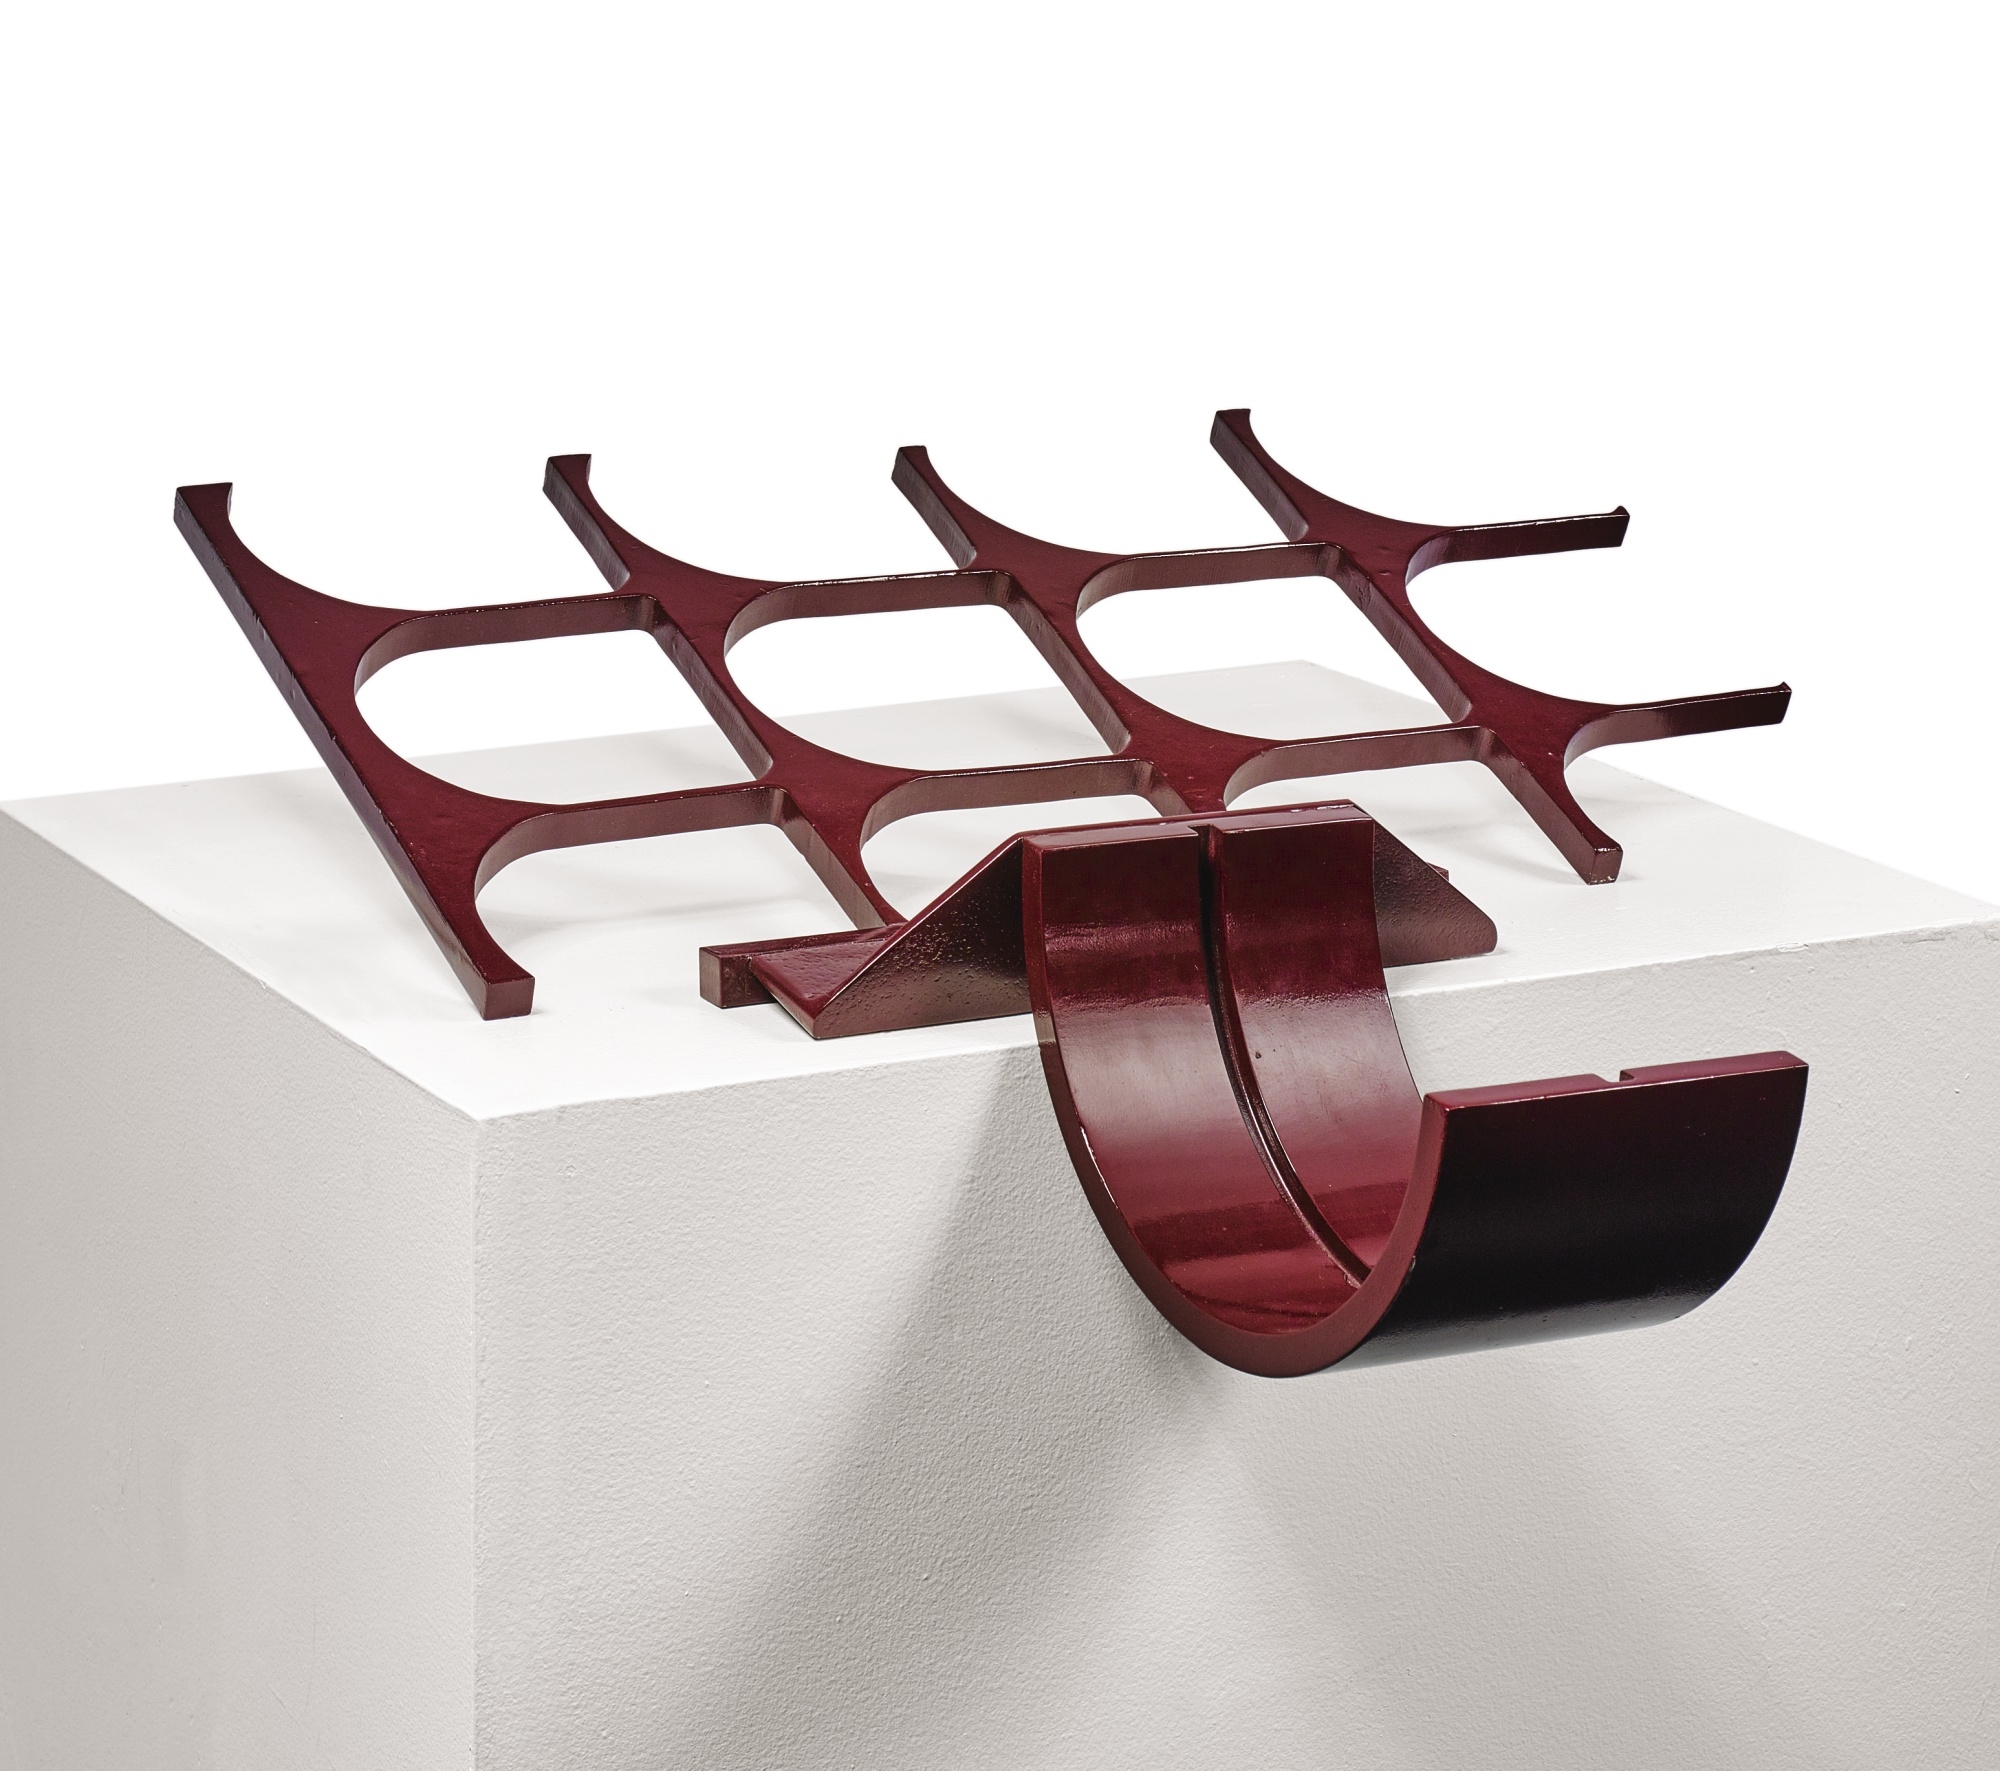 TABLE PIECE LIII by Anthony Caro, 1968